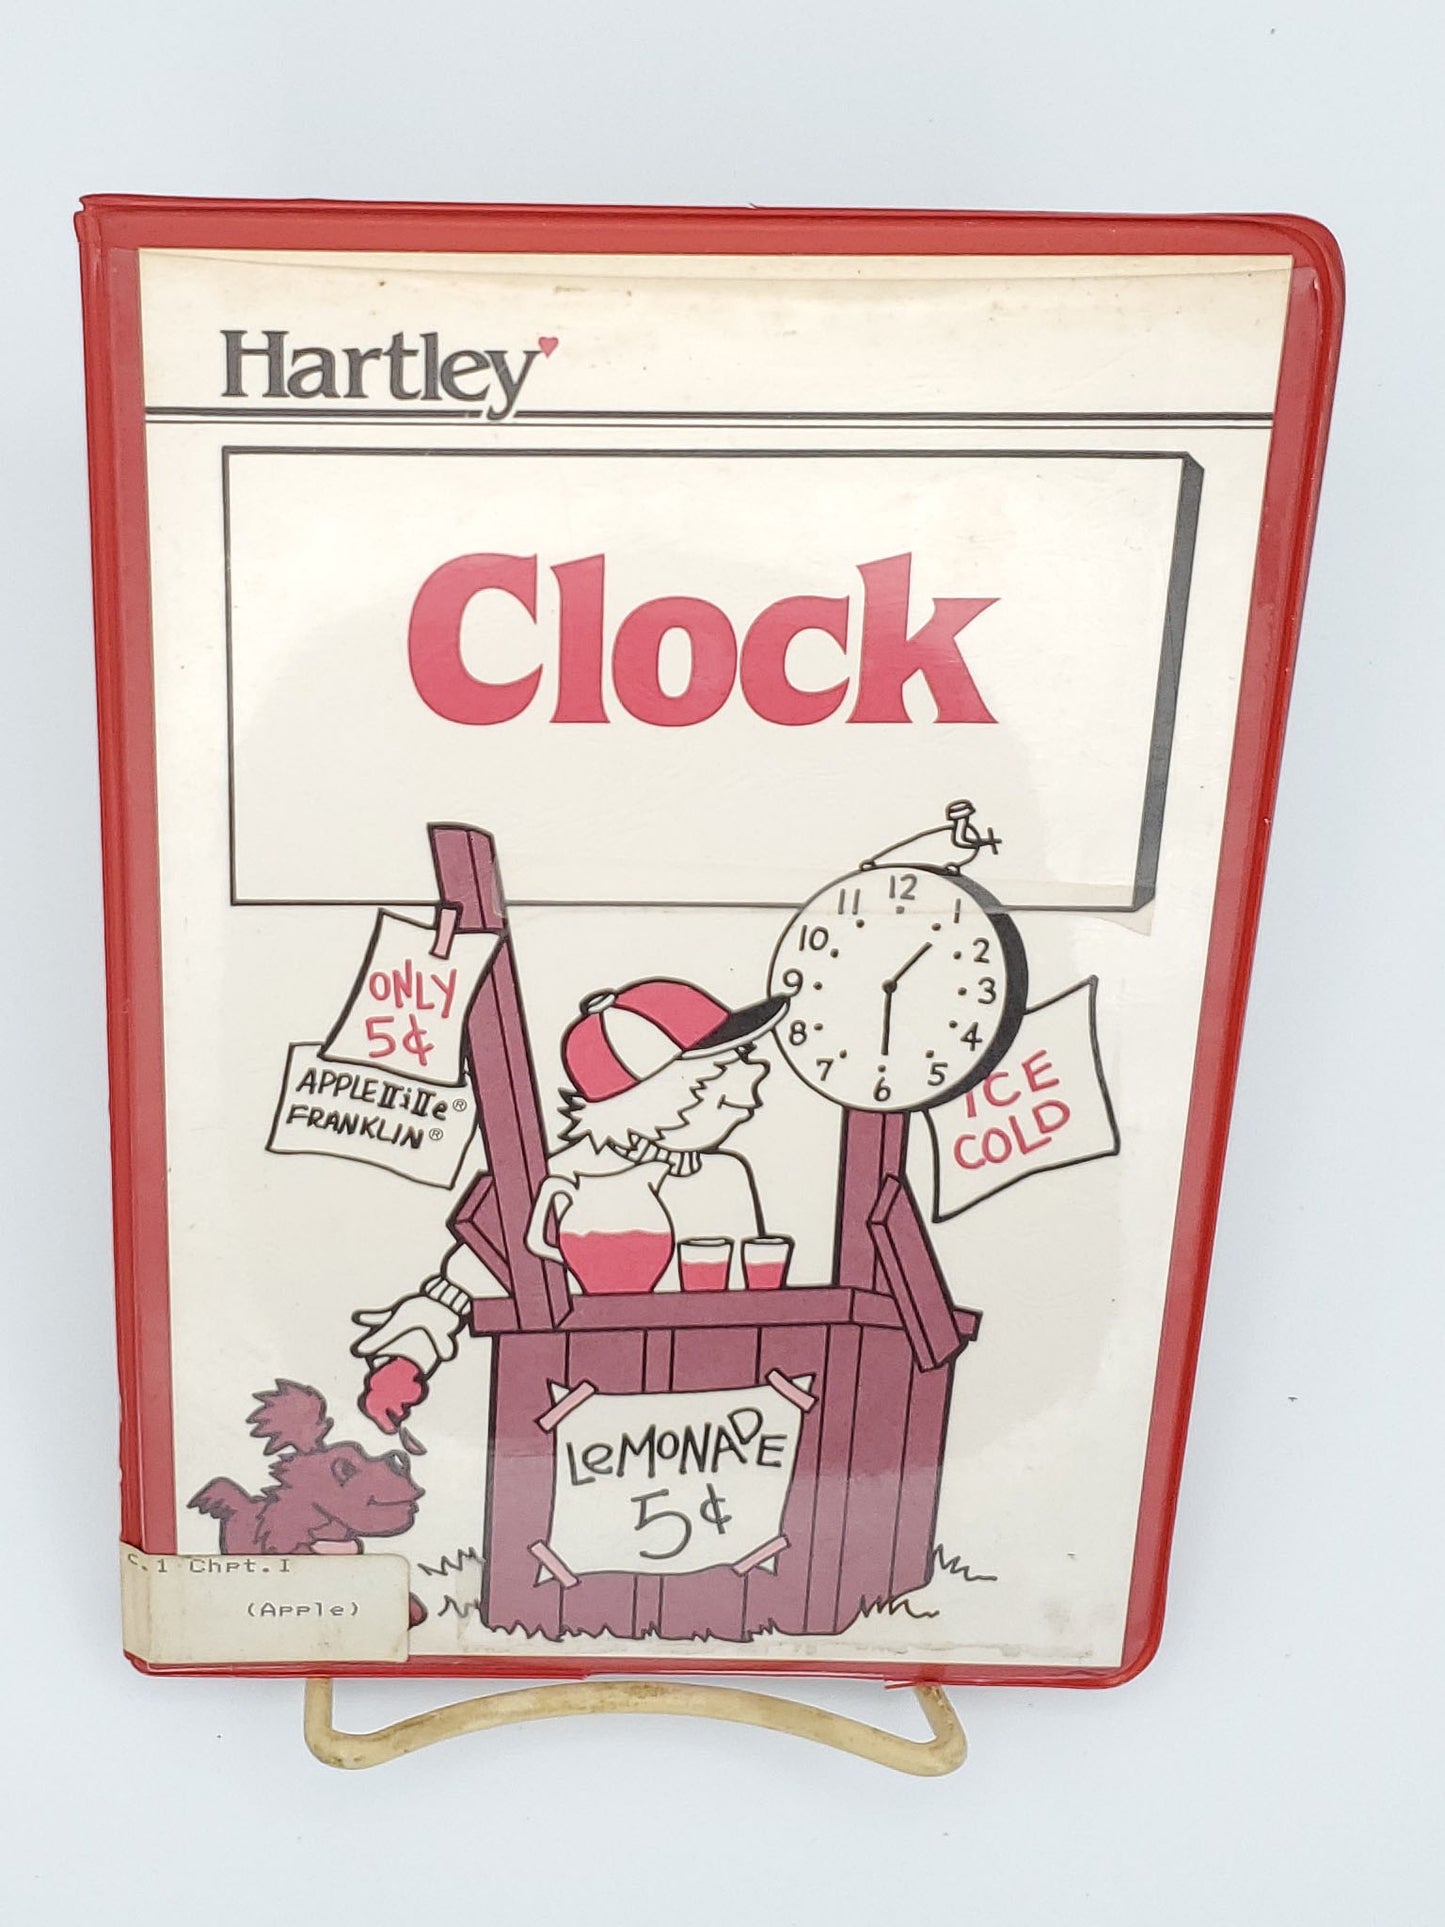 Clock Chapter 1 for the Apple II